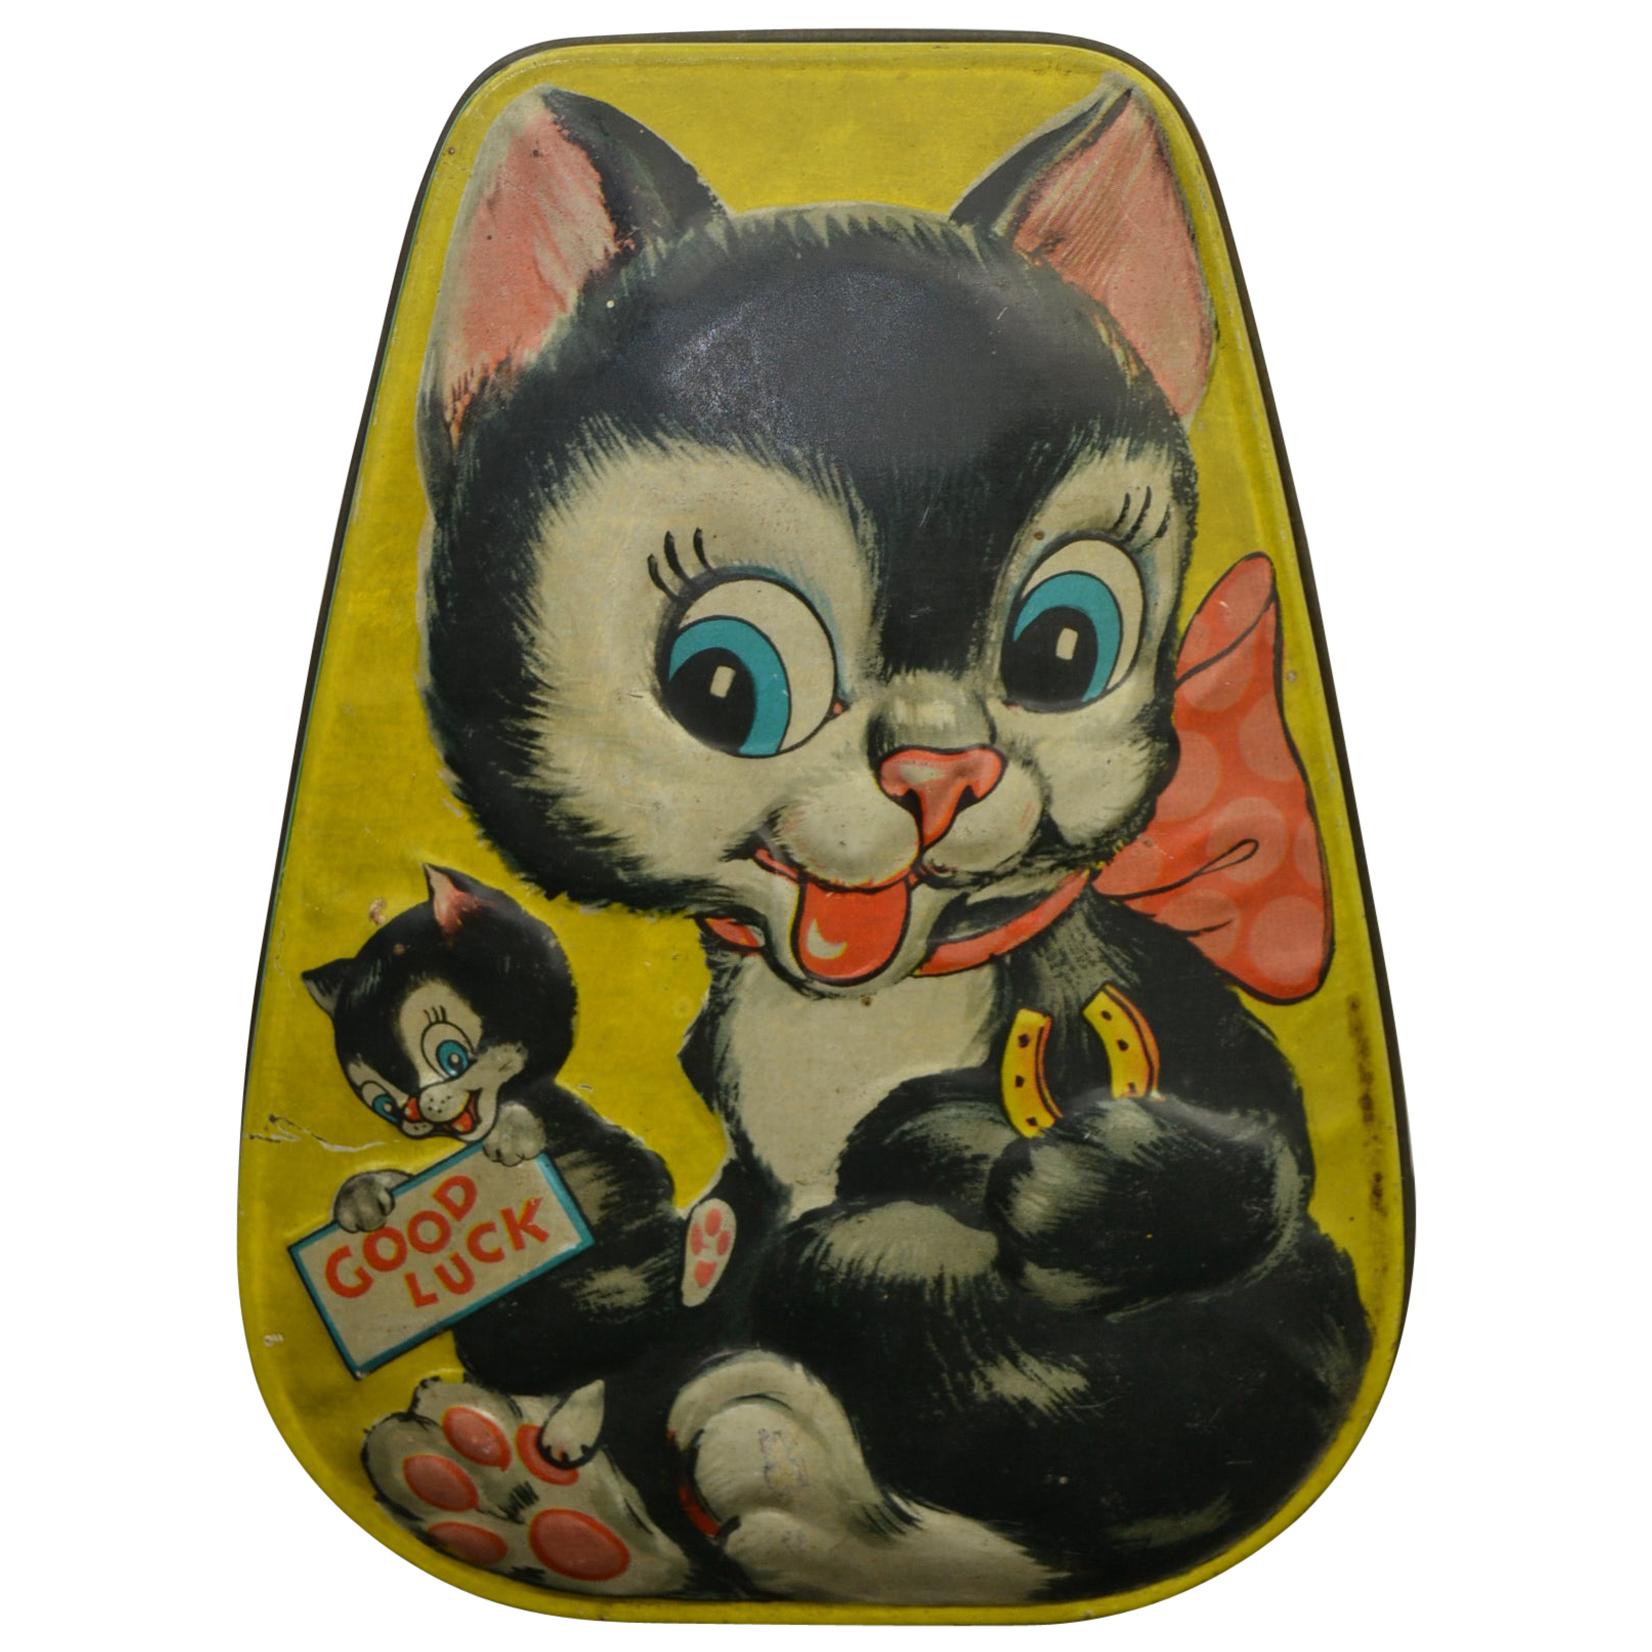 Toffee Tin with Cats for Horner's Candy, England, Mid-20th Century